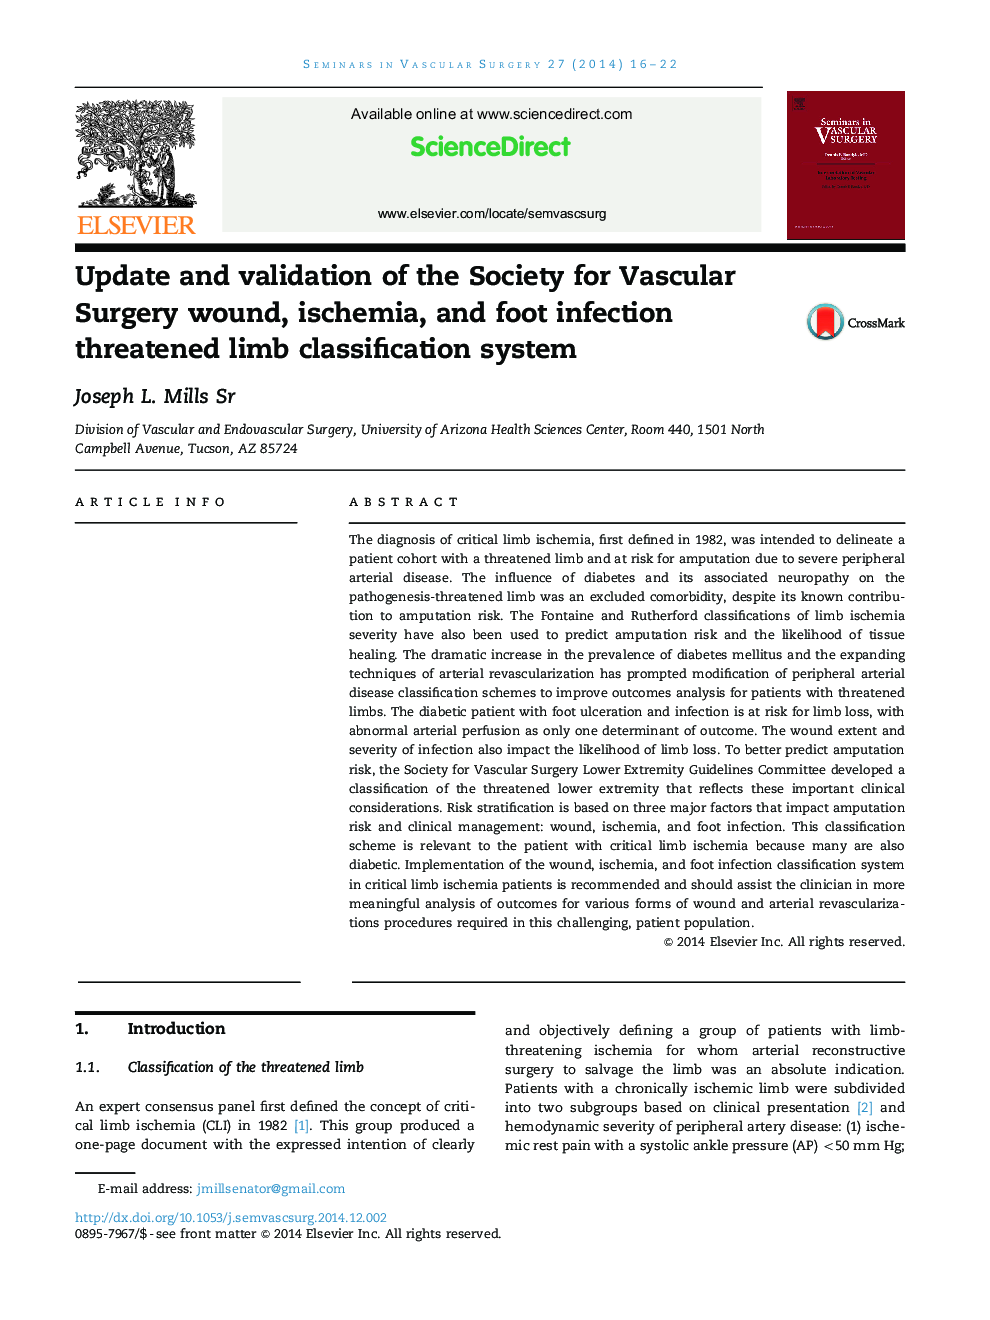 Update and validation of the Society for Vascular Surgery wound, ischemia, and foot infection threatened limb classification system